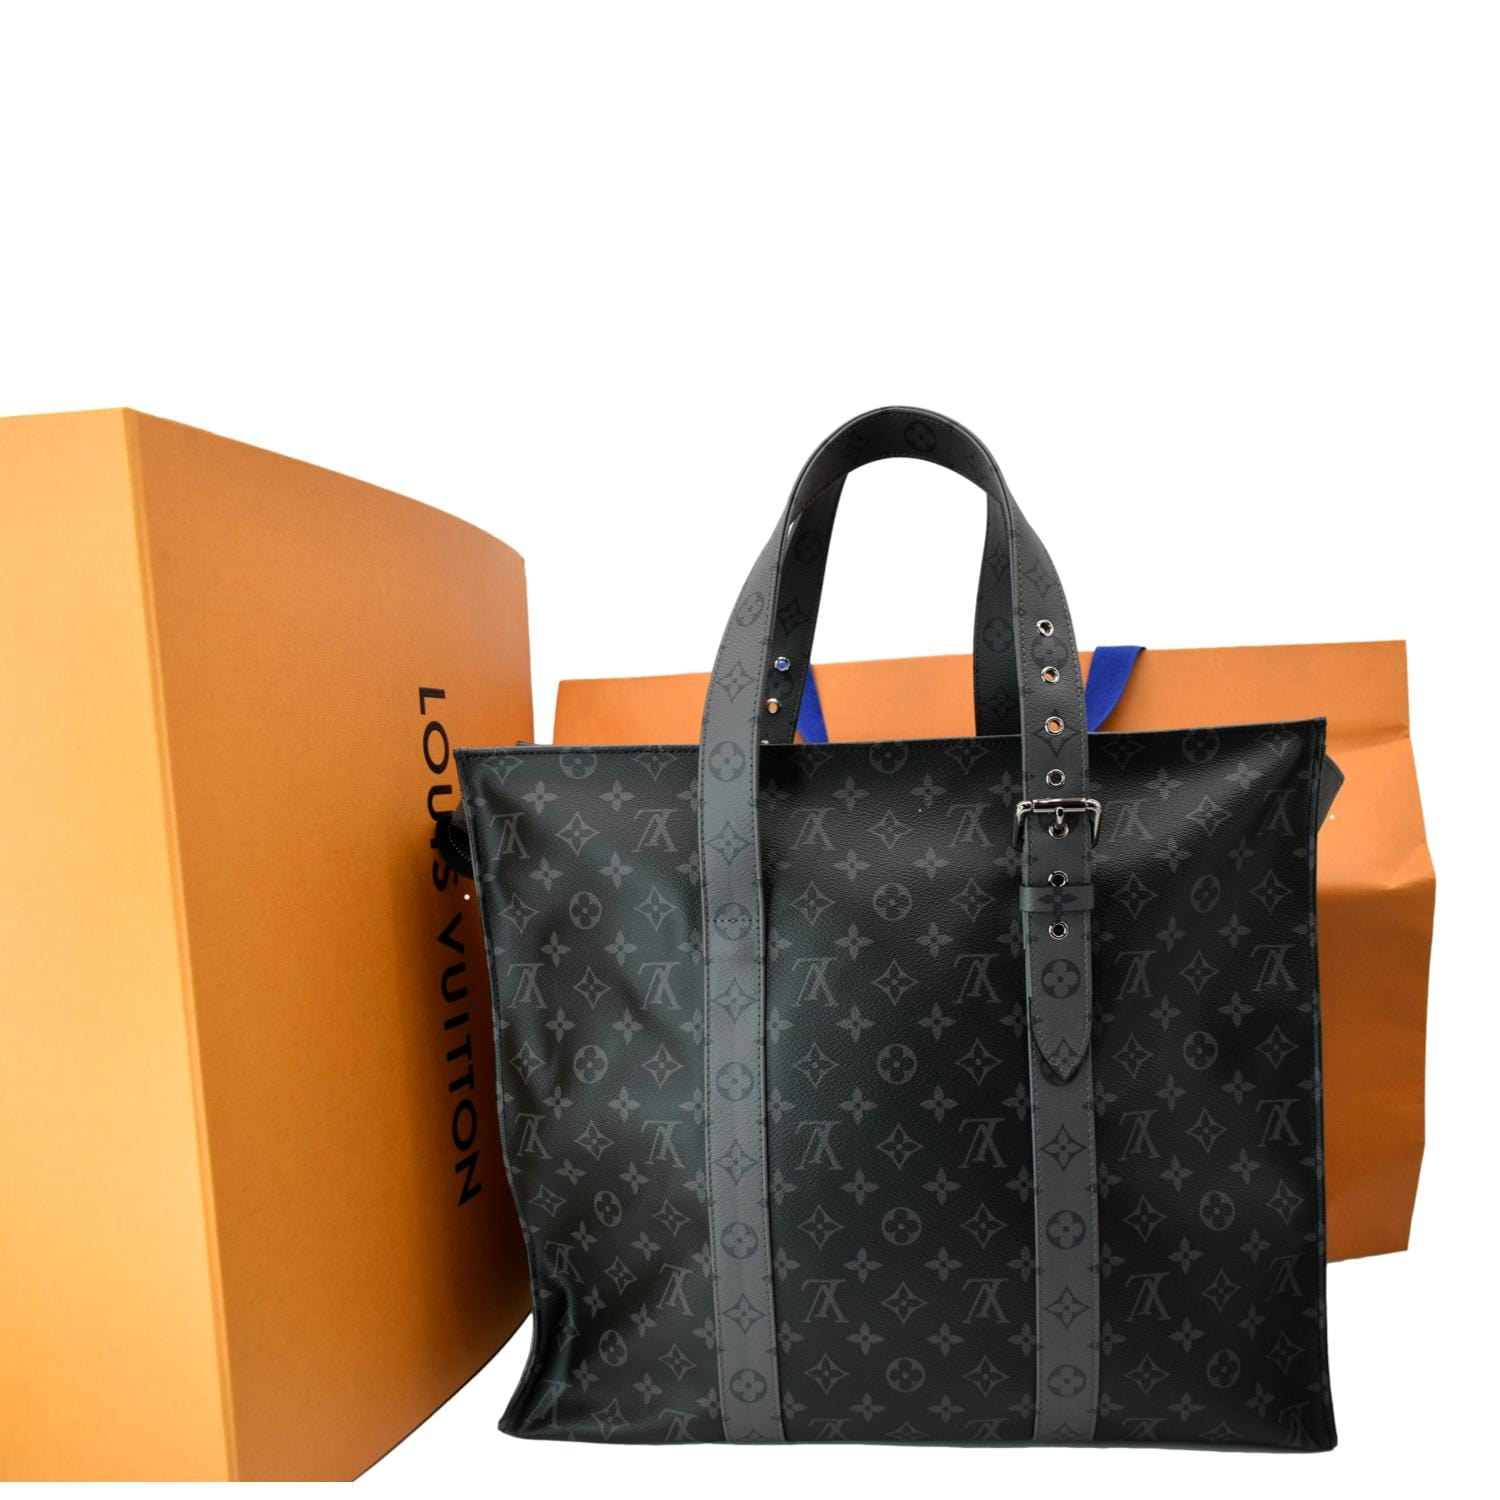 Buy Free Shipping Authentic Pre-owned Louis Vuitton Lv Limited Edition  Cabas Ambre Gm Shoulder Tote Bag M92500 220129 from Japan - Buy authentic  Plus exclusive items from Japan